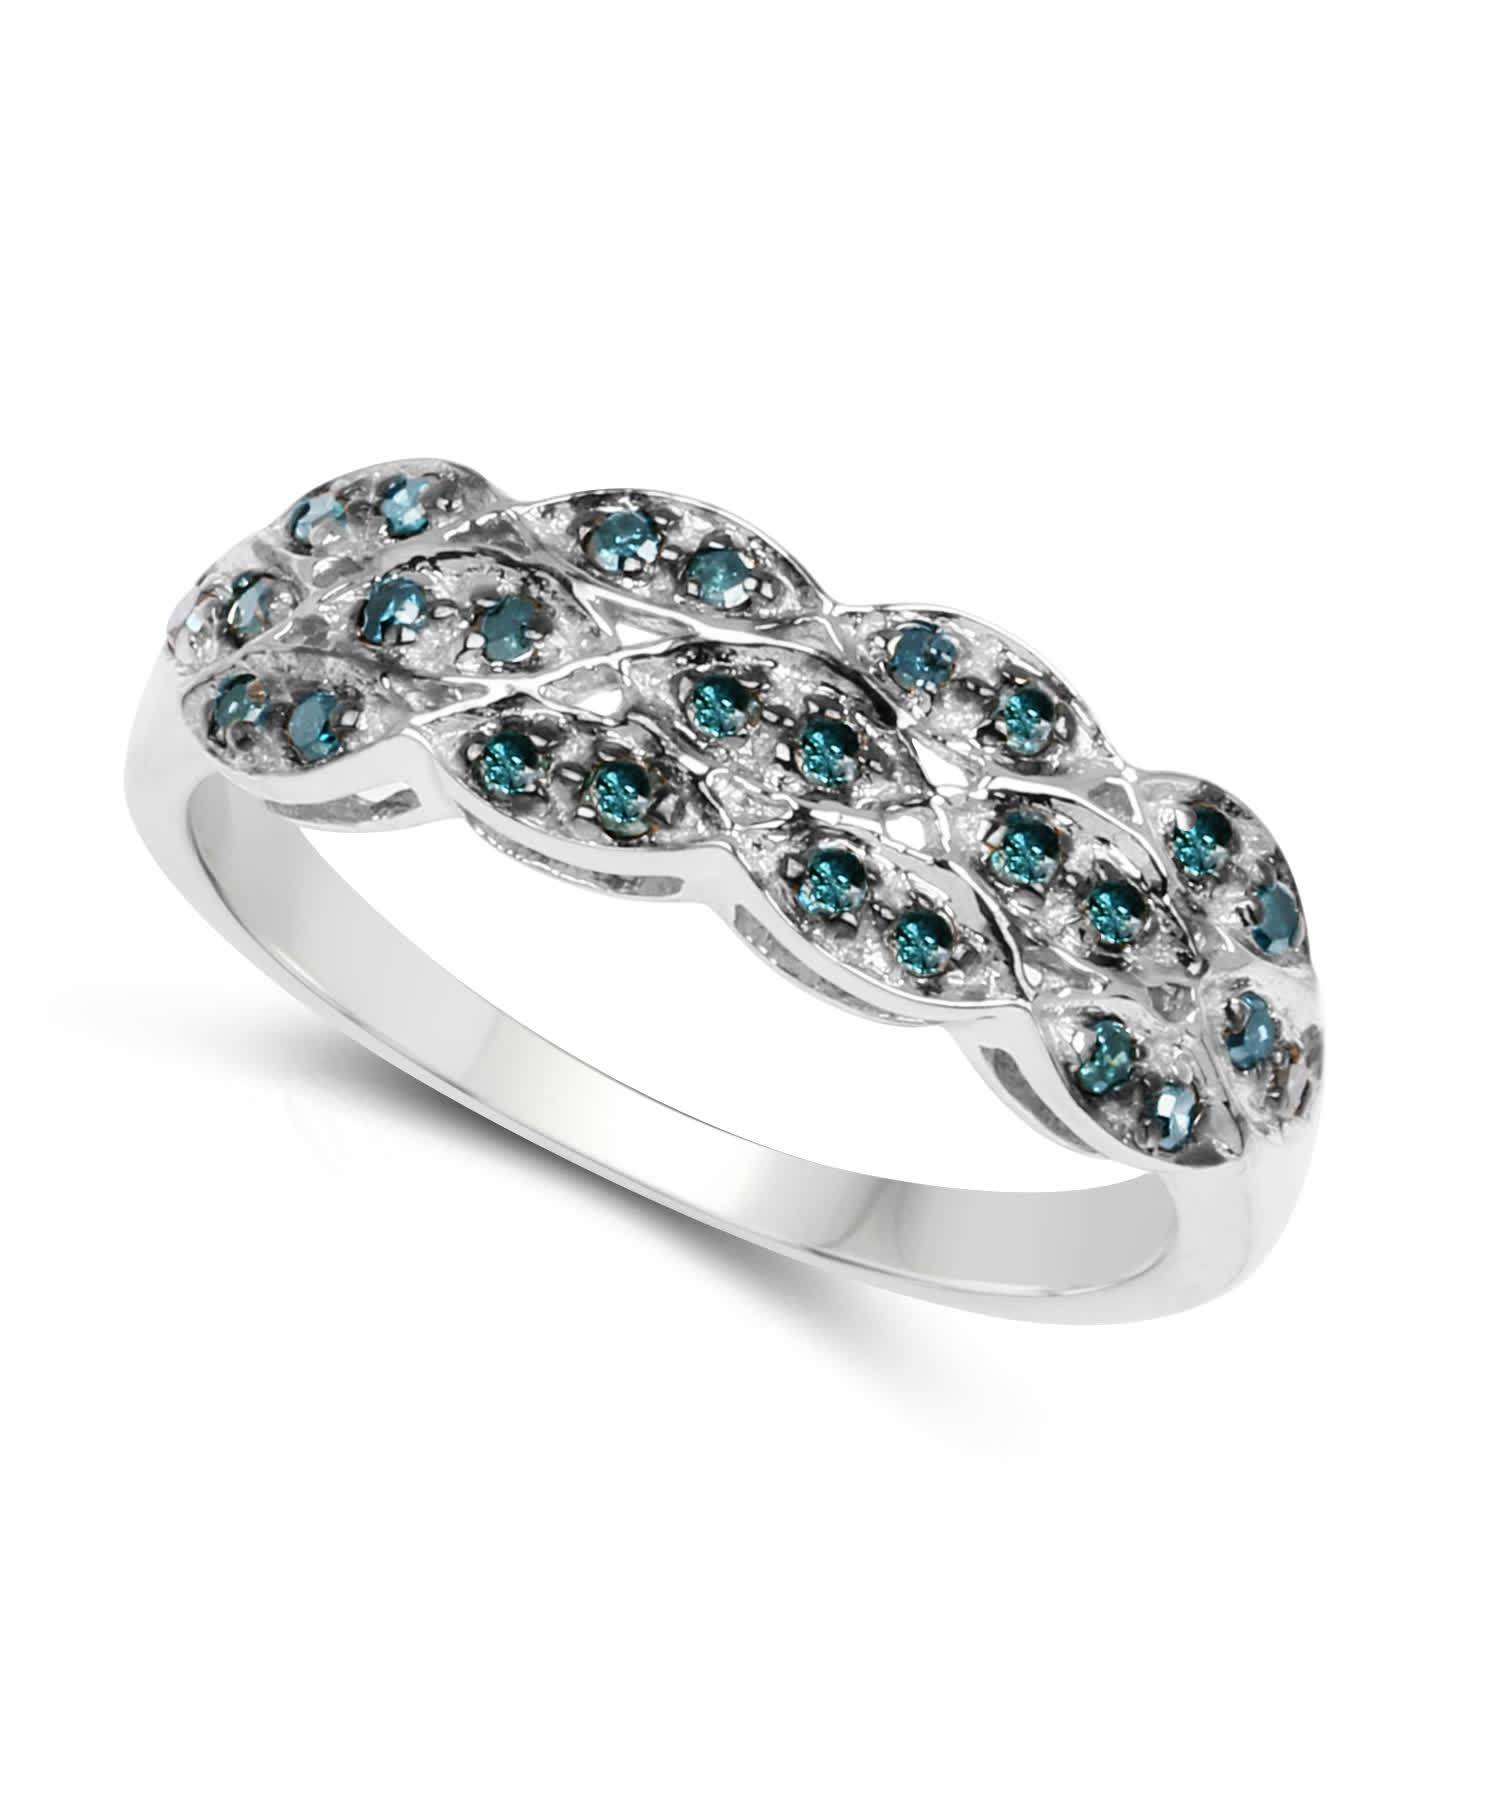 0.31ctw Fancy Blue Diamond Rhodium Plated 925 Sterling Silver Fashion Ring View 2